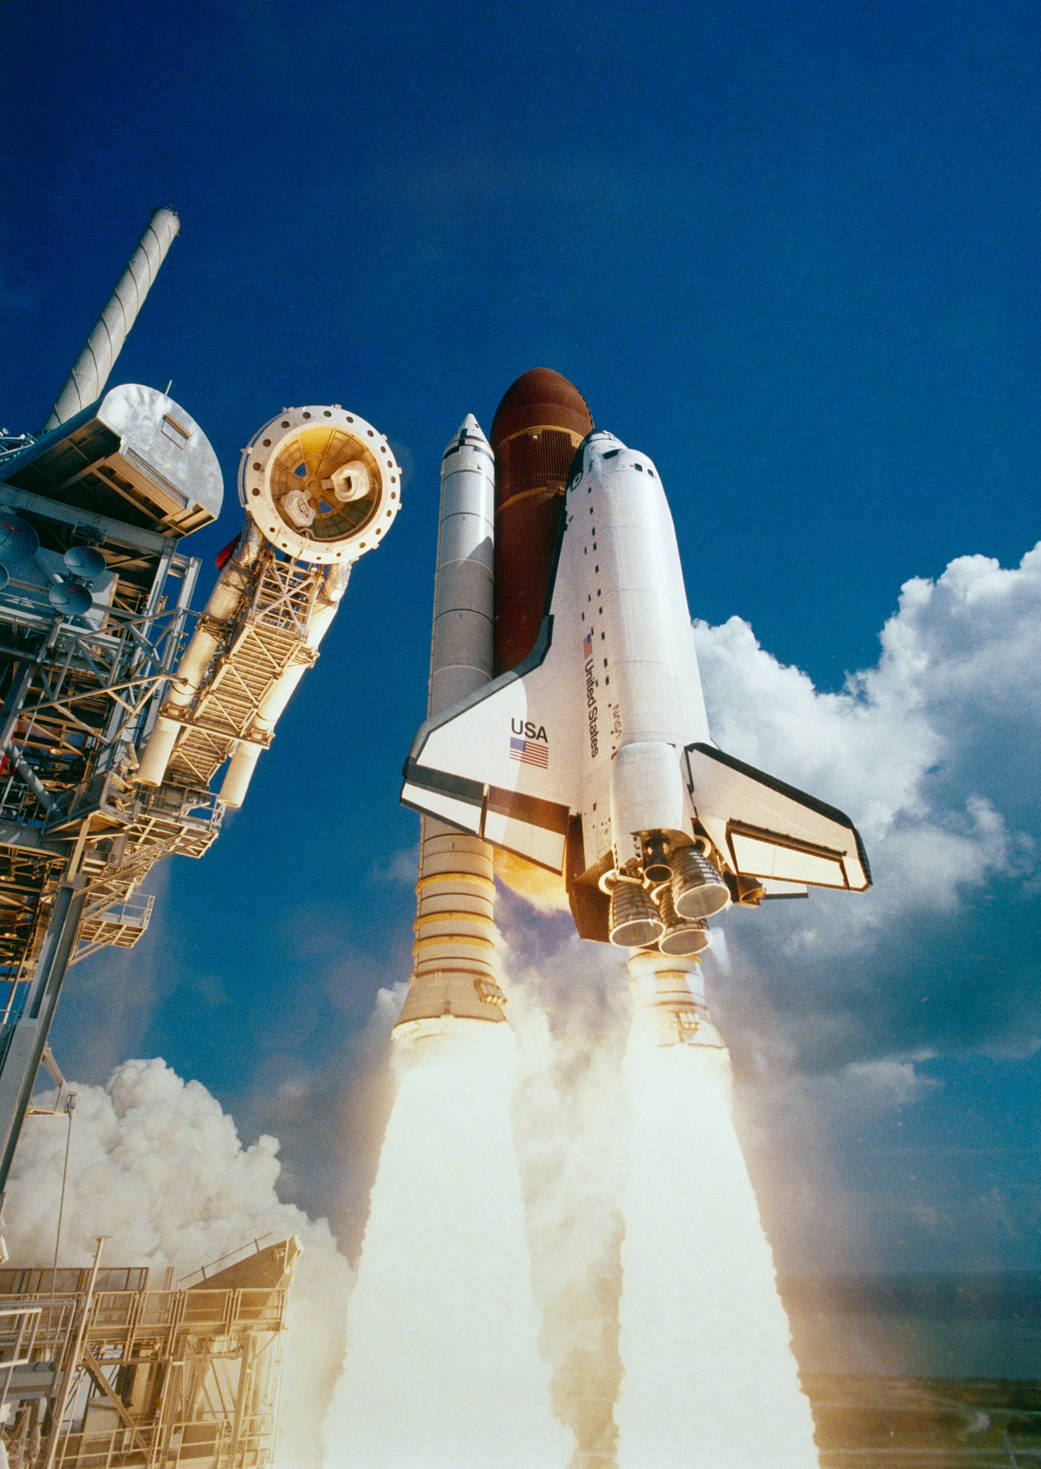 This week in 1985, STS-51J launched from NASA’s Kennedy Space Center on the first flight of the space shuttle Atlantis.